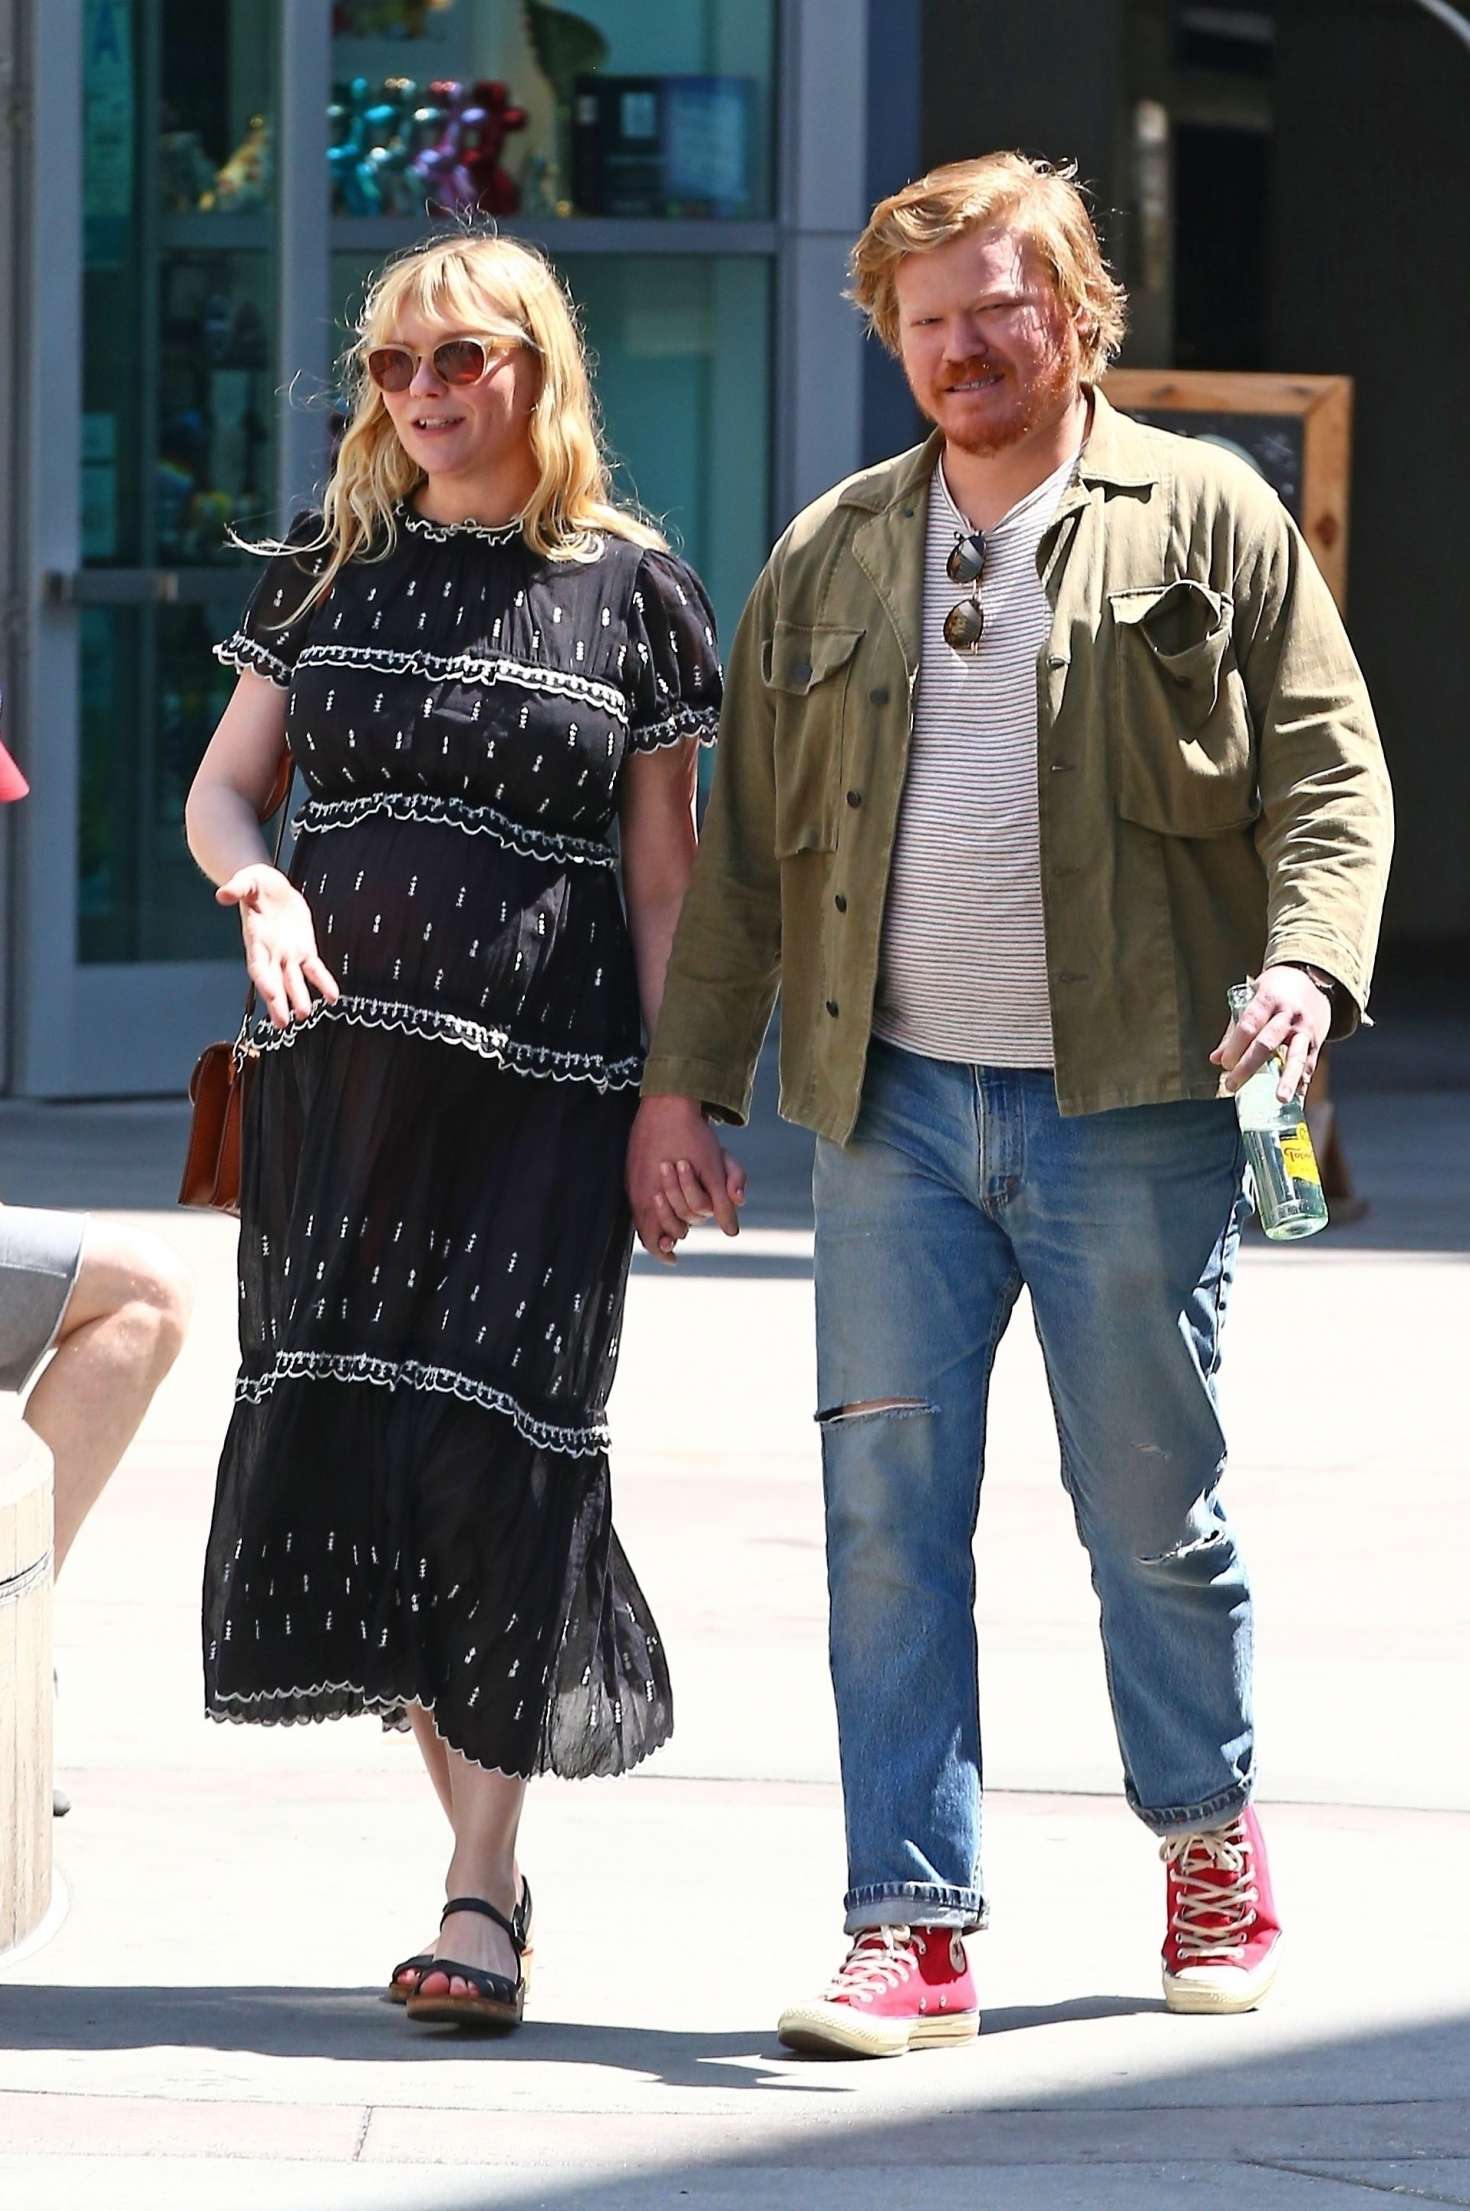 Kirsten Dunst with husband out in Hollywood -05 - GotCeleb